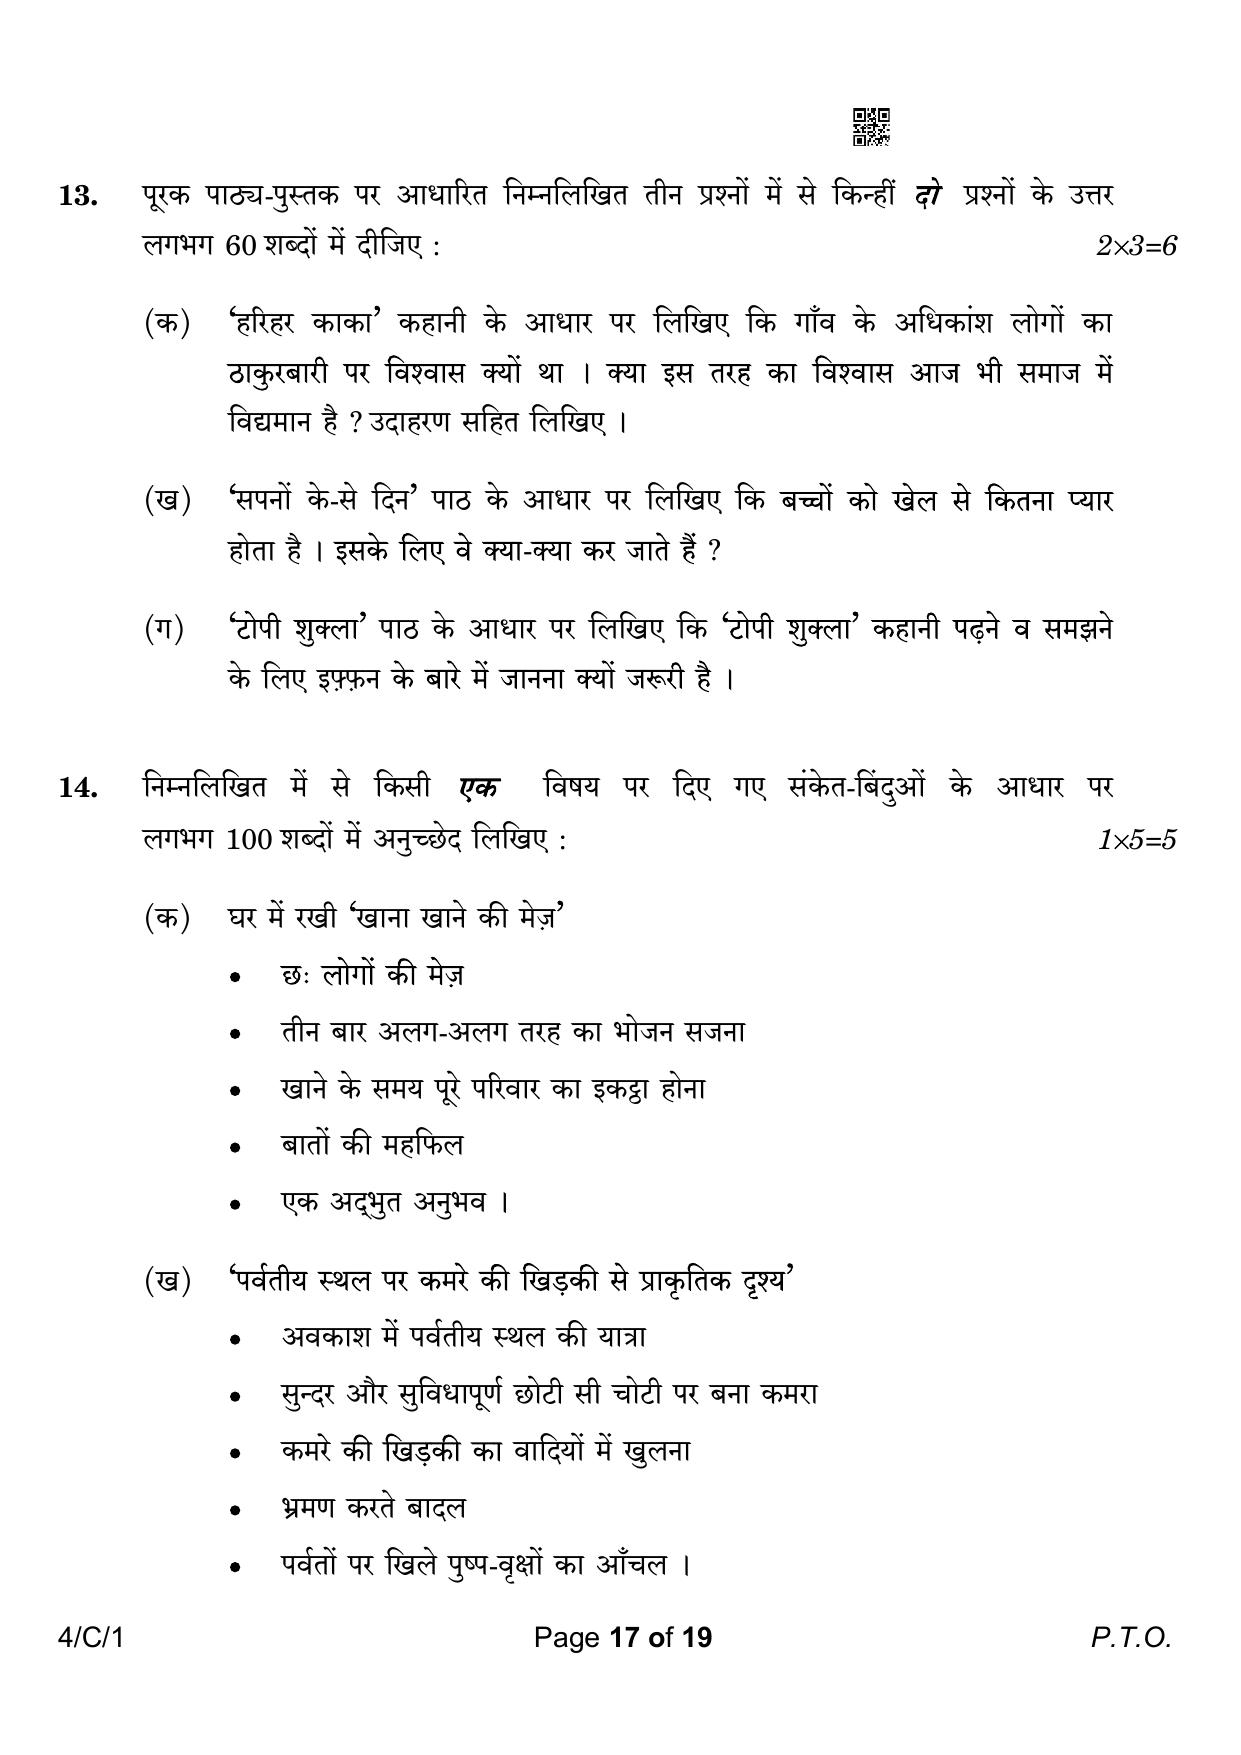 CBSE Class 10 4-1 Hindi B 2023 (Compartment) Question Paper - Page 17